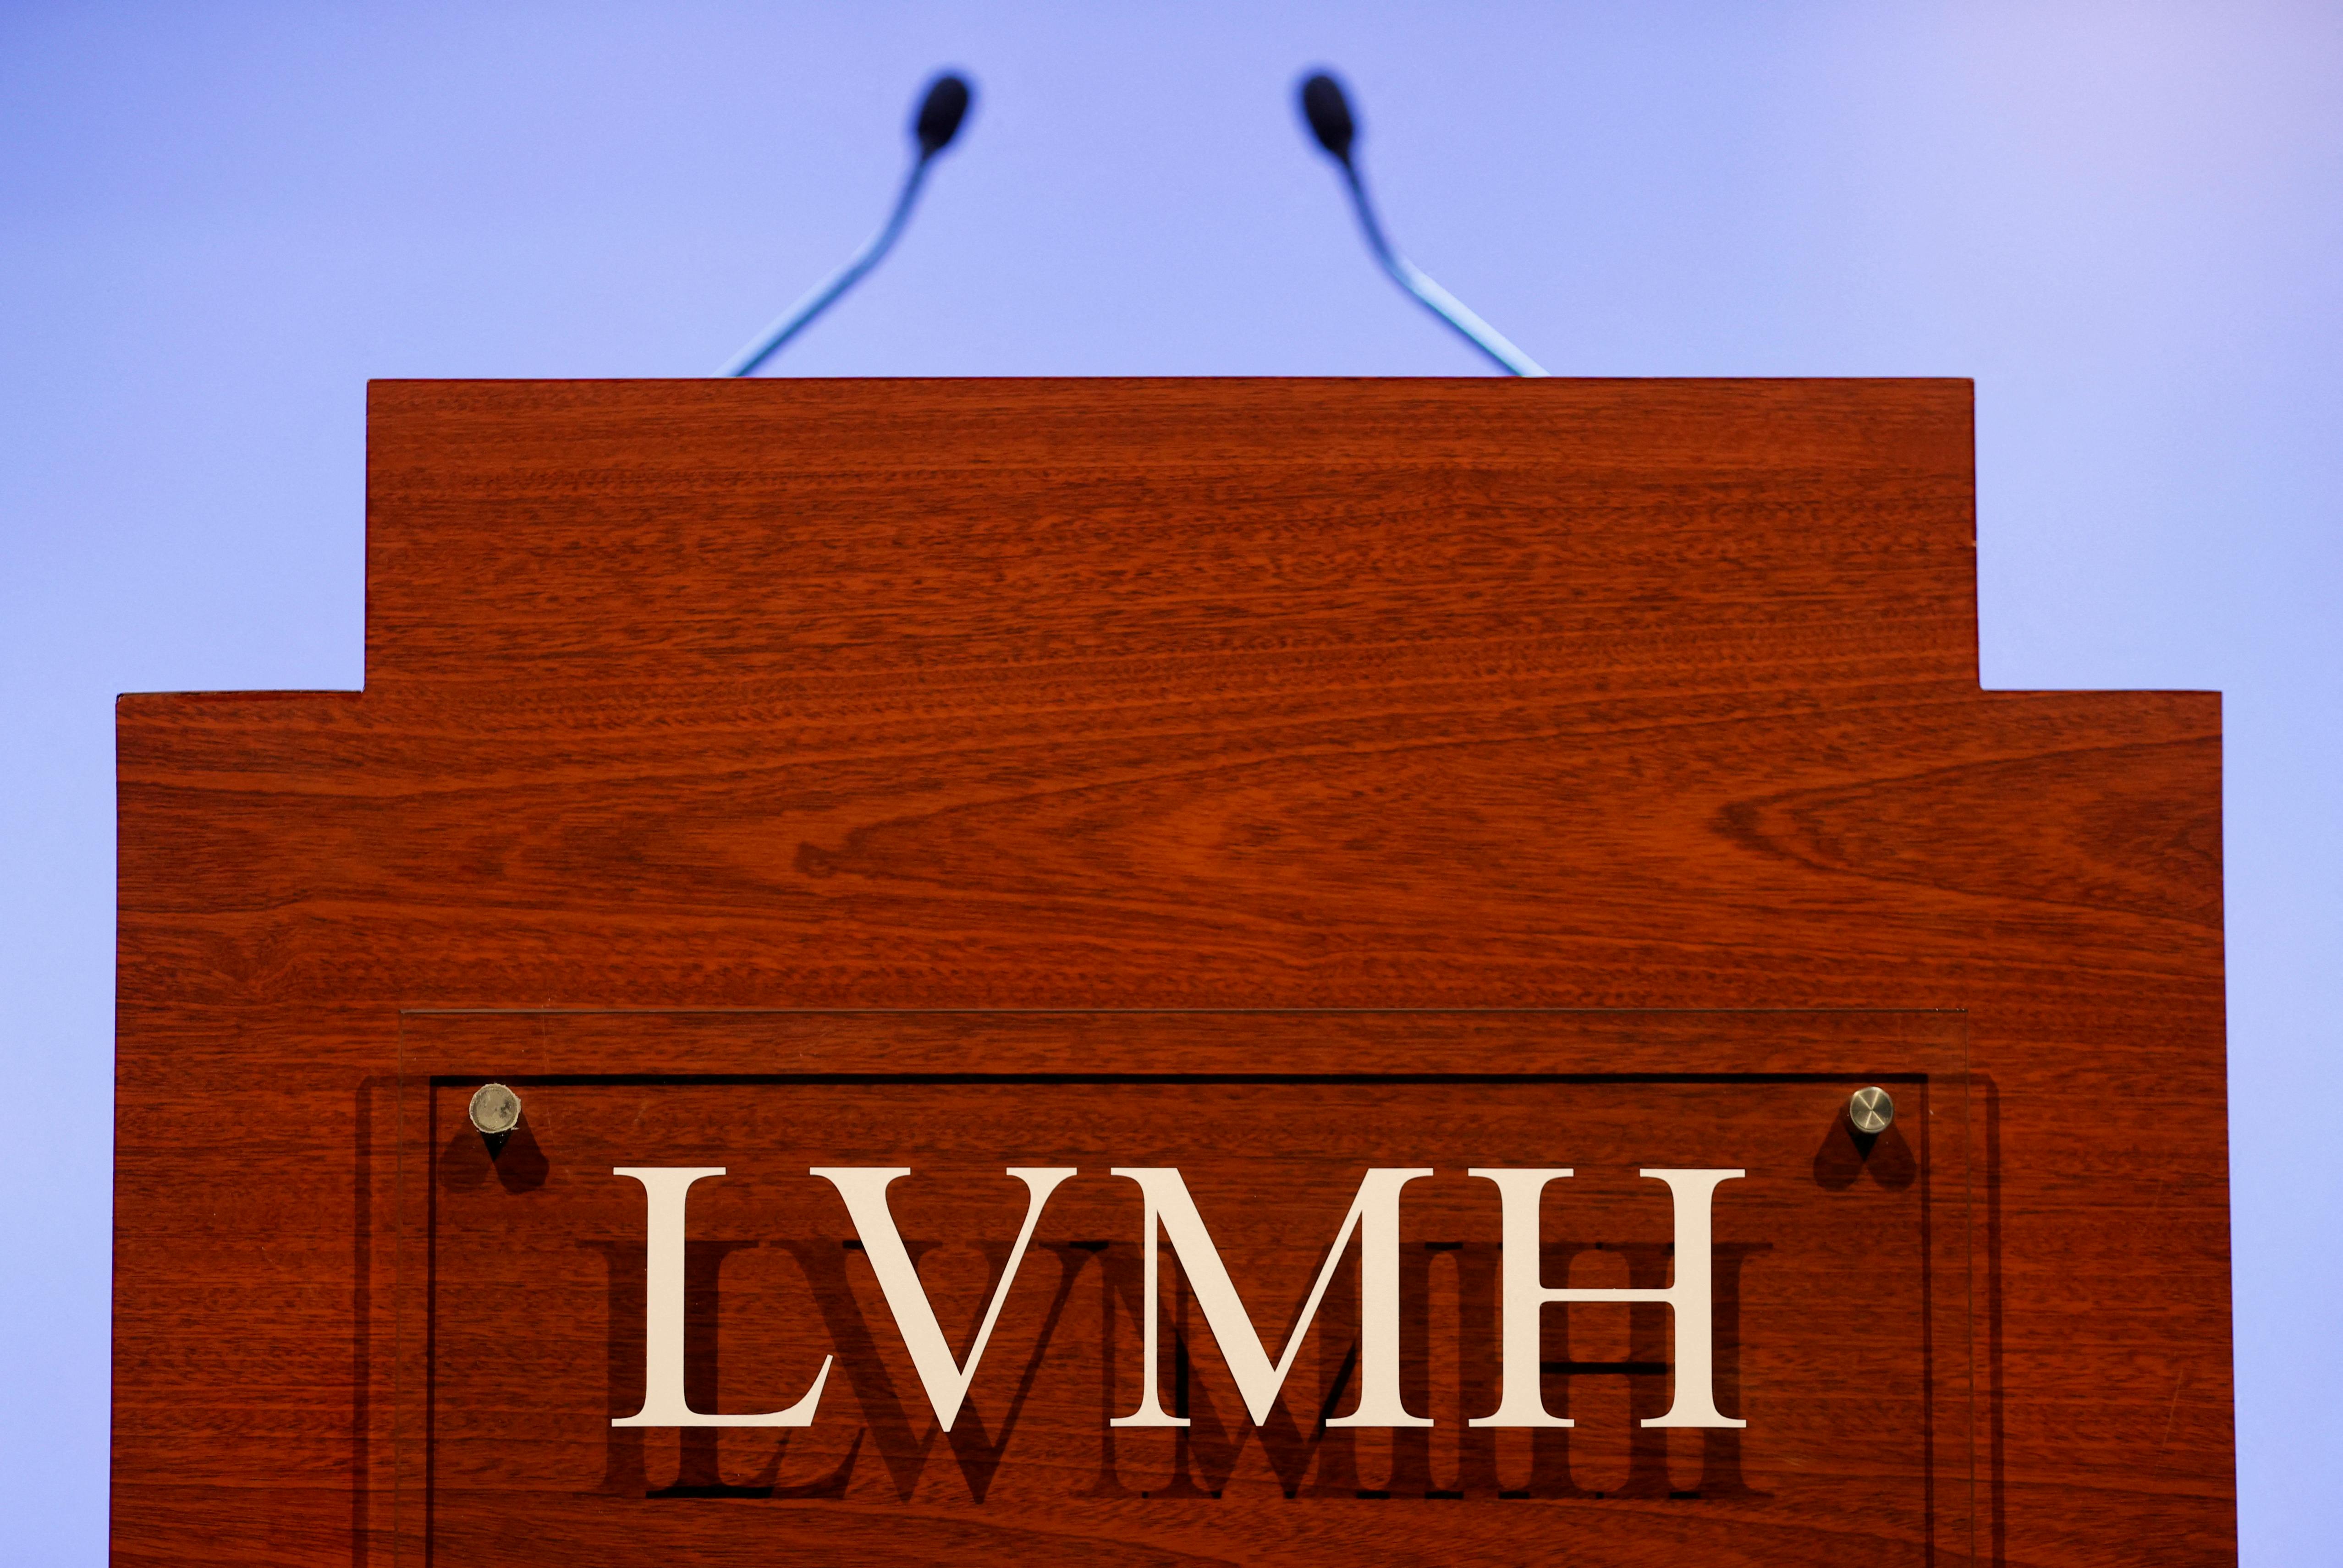 Kering vs LVMH: which French fashion stocks are worth it?